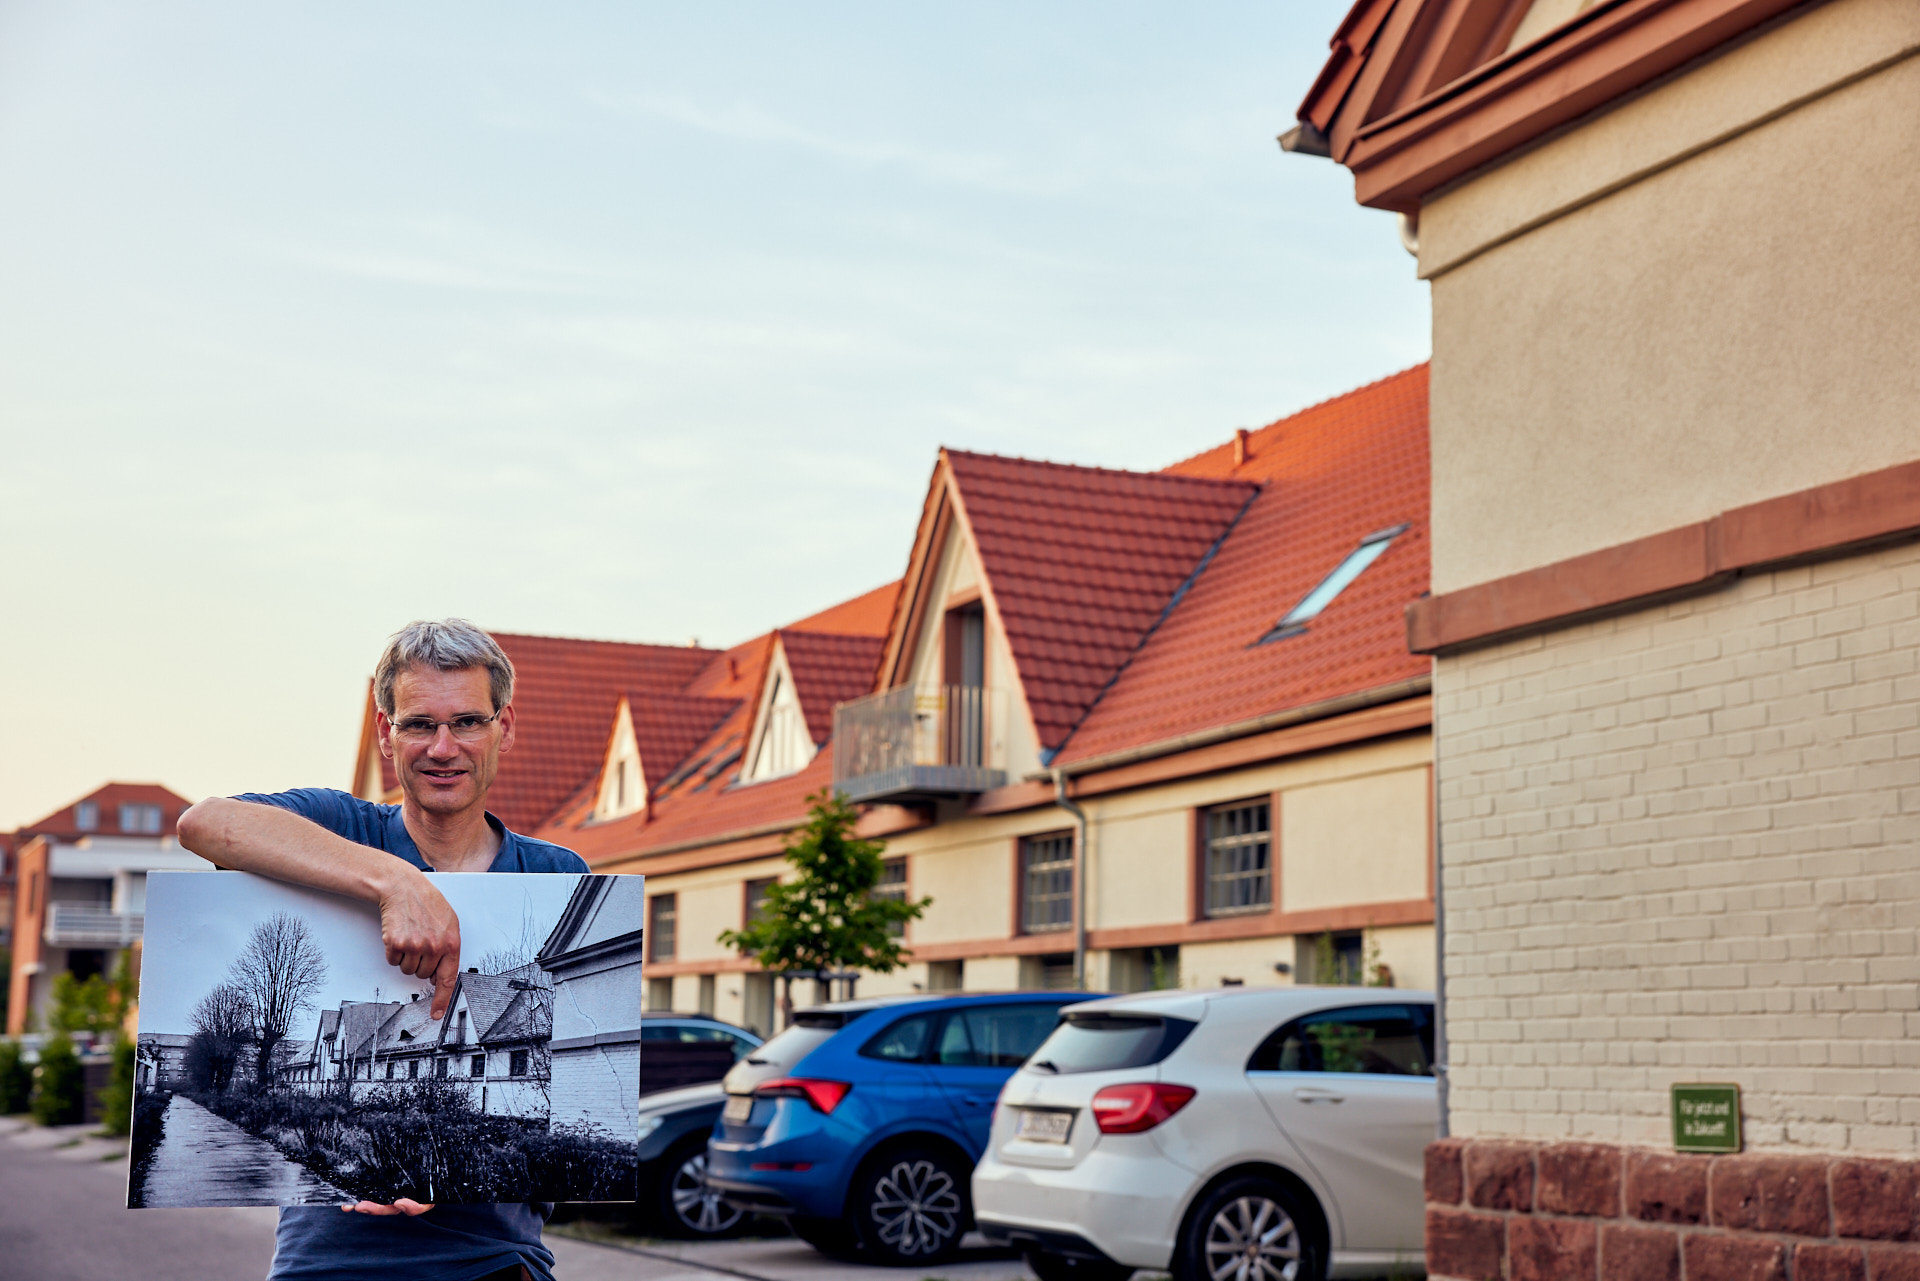 Peter Eichenlaub with before picture in front of the old military horse stables converted into flats with sign “For now and in the future!” (Photo: Niko Martin)